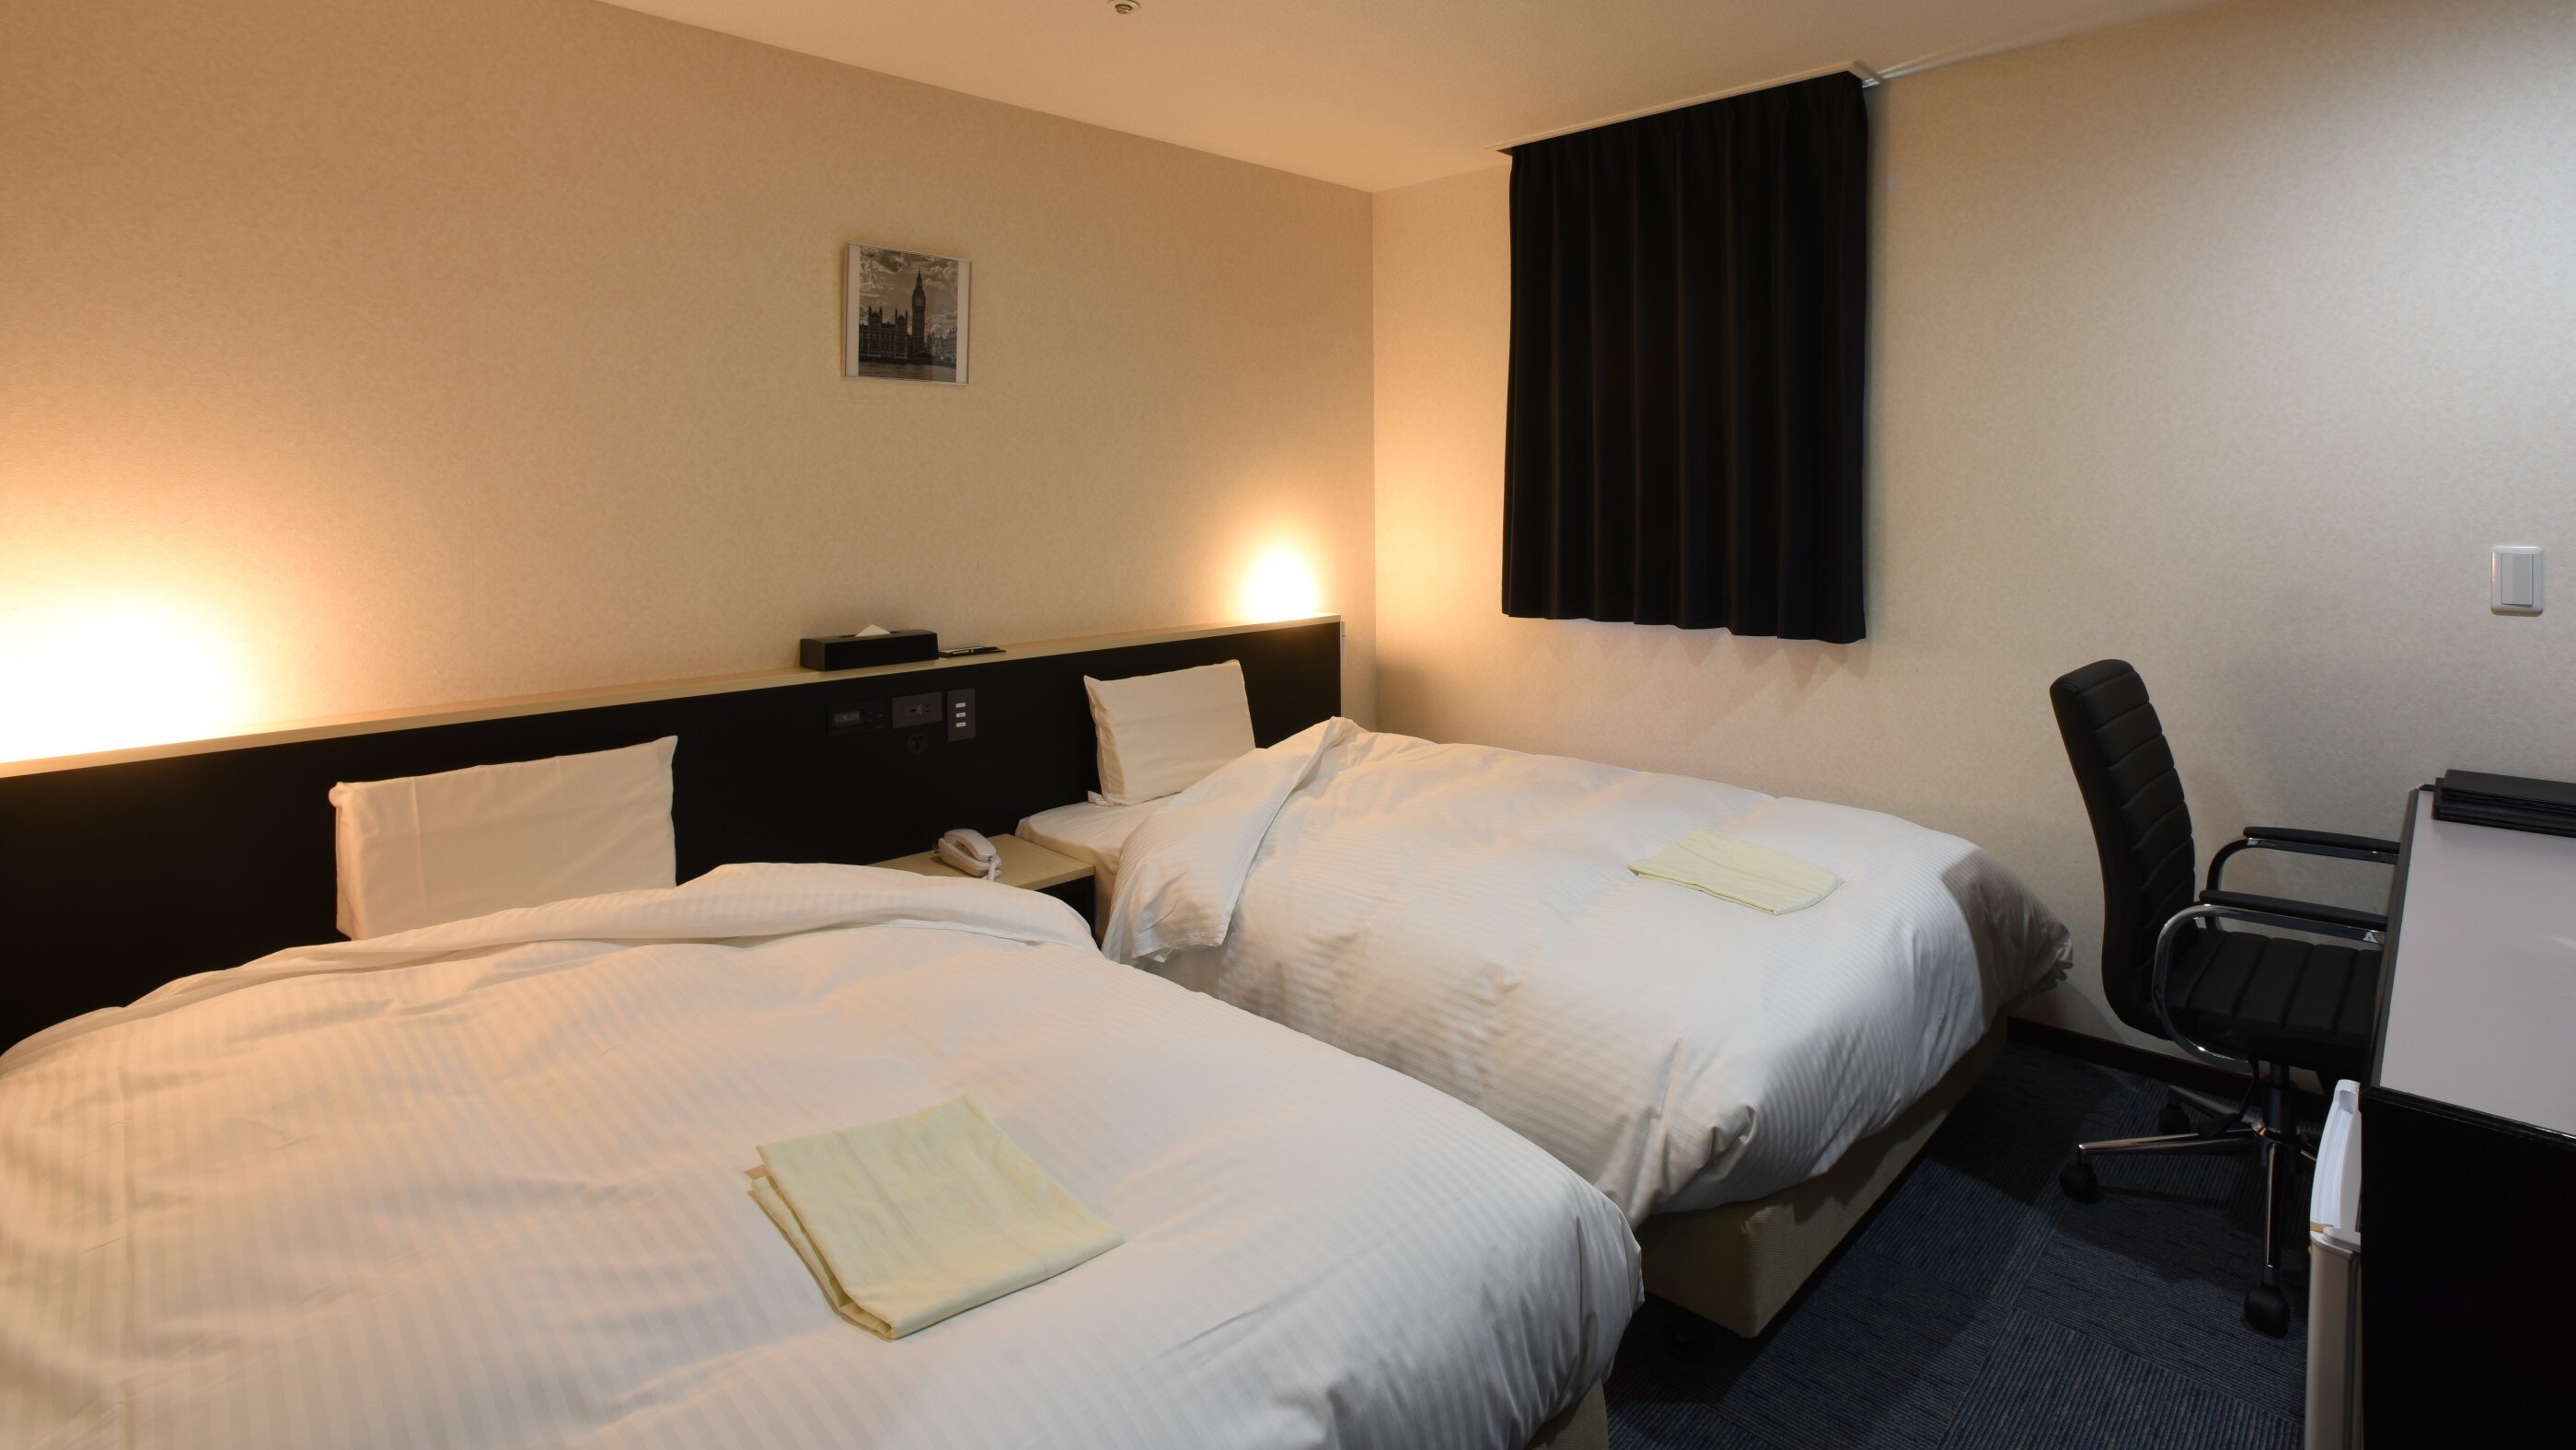 A convenient room for staying with friends ♬